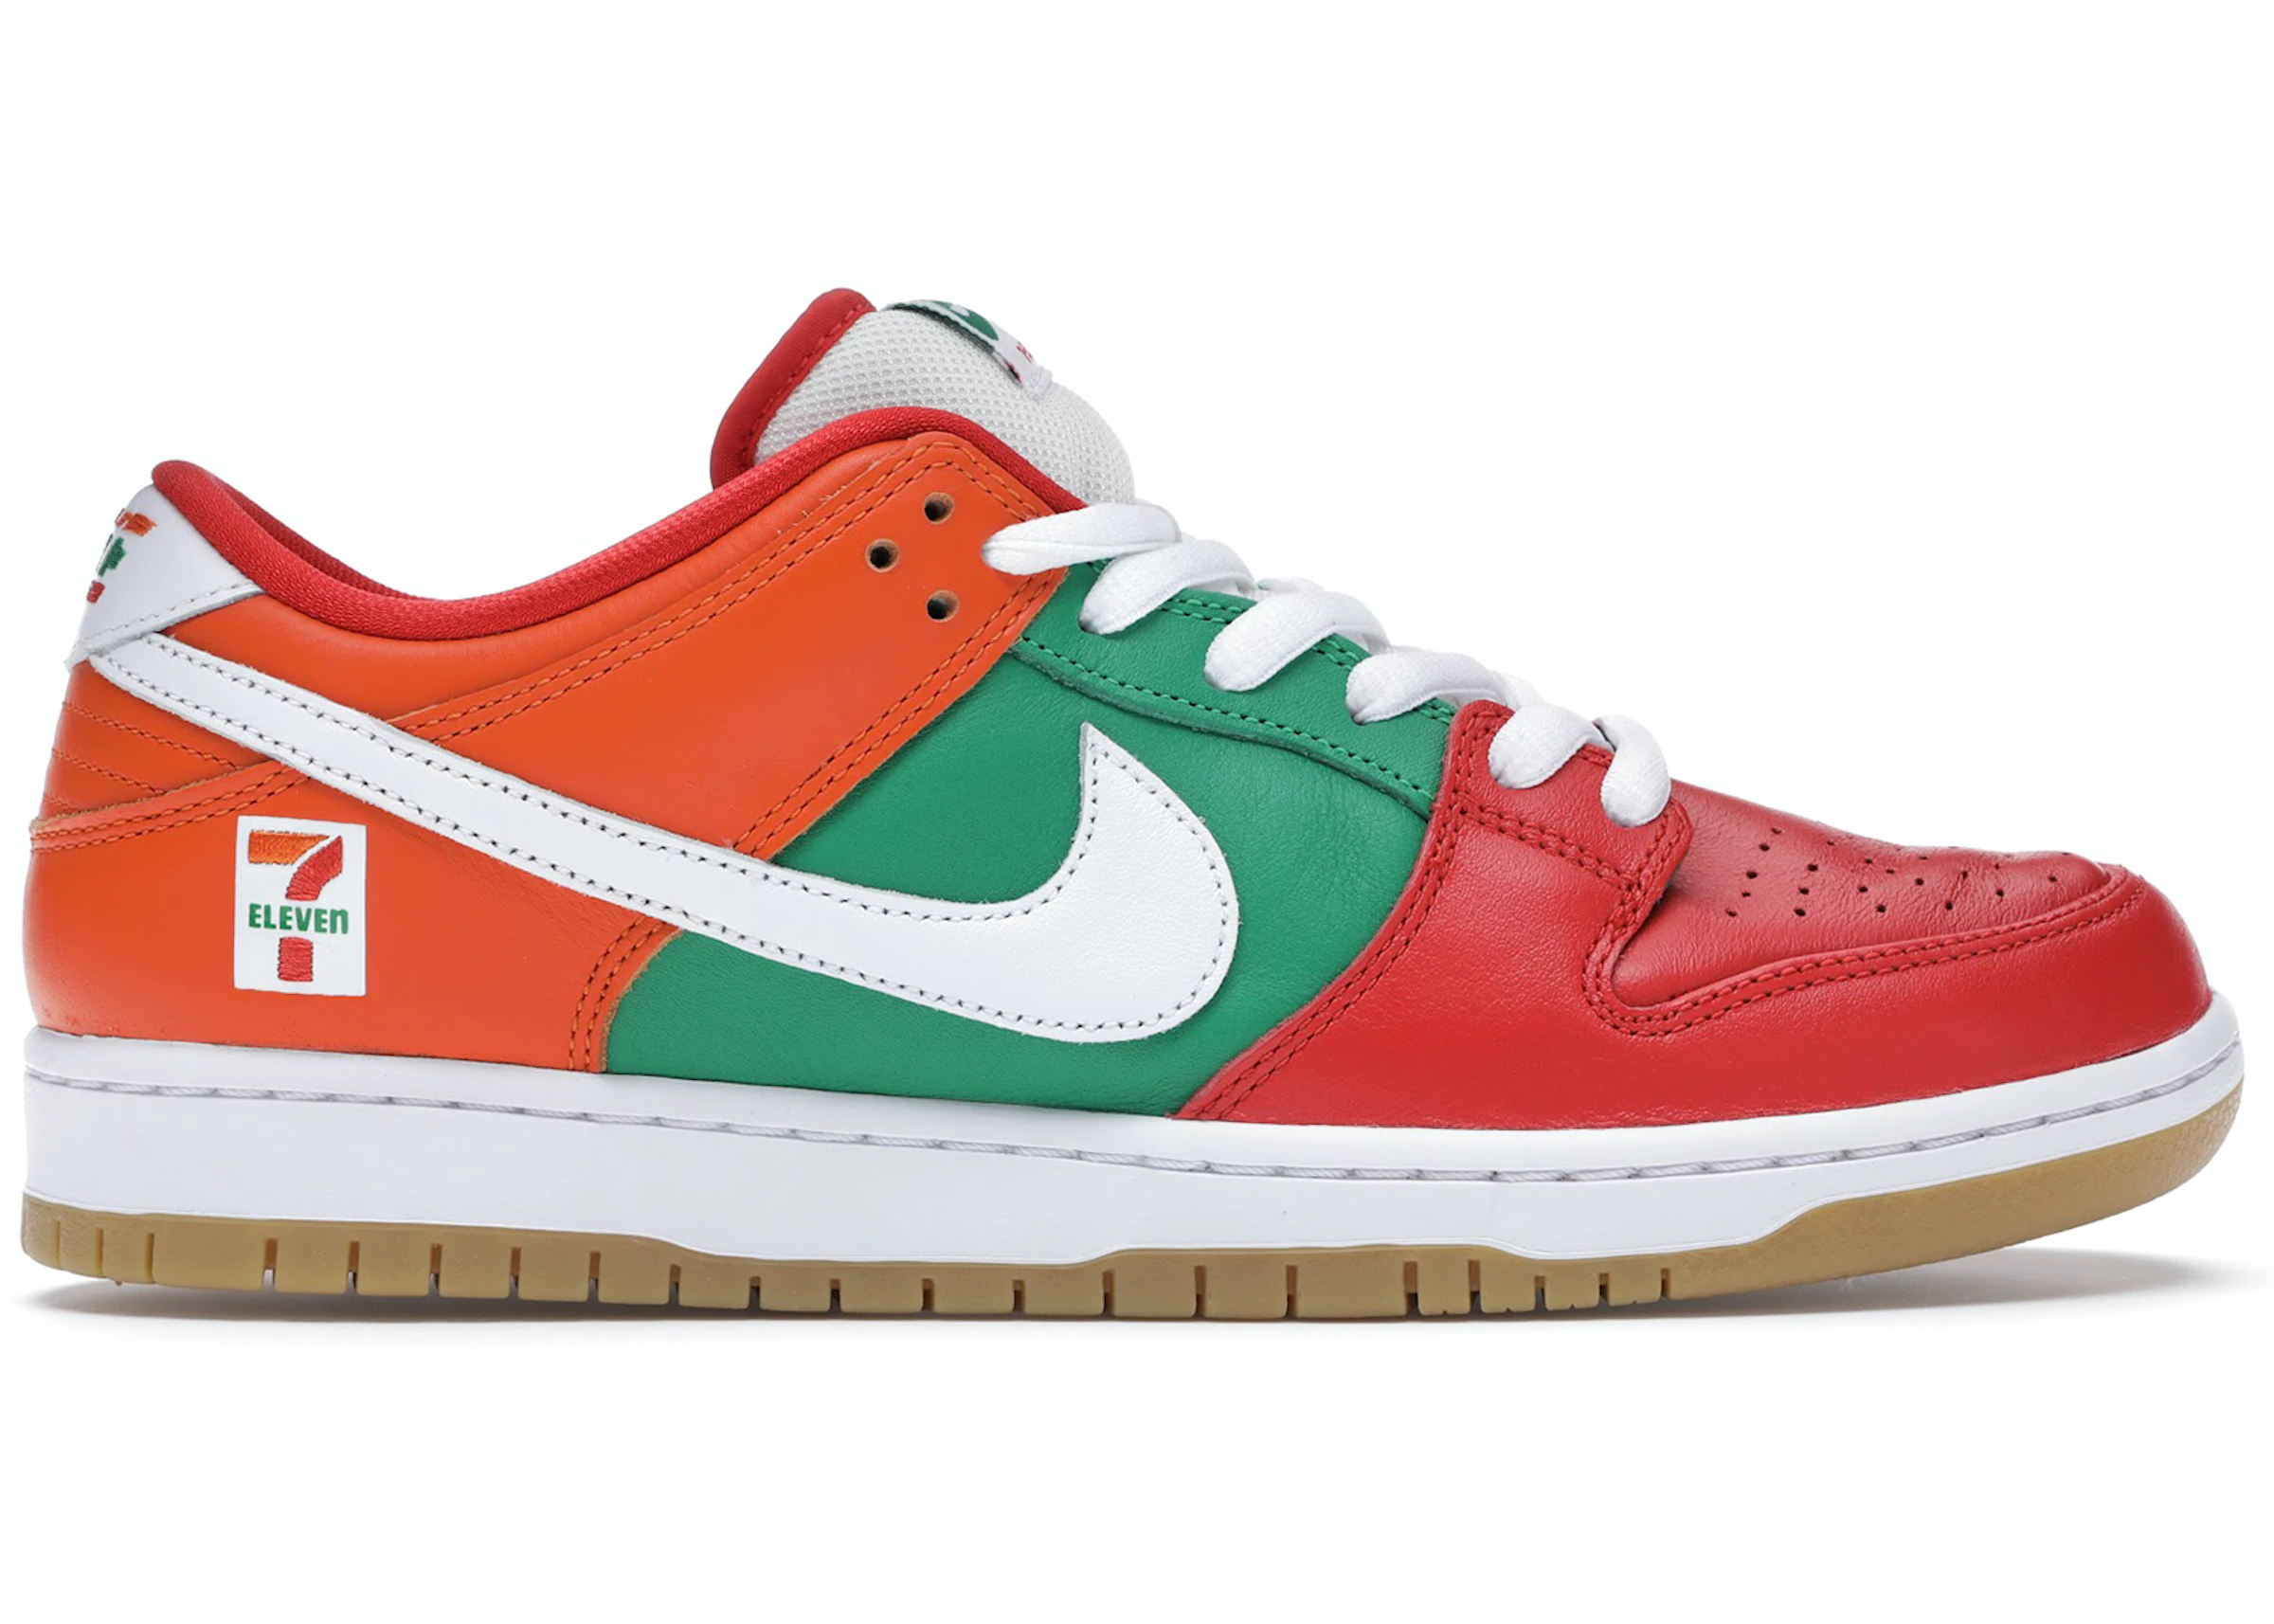 pageant Closely Install Nike SB SB Dunk Low Shoes - Highest Bid